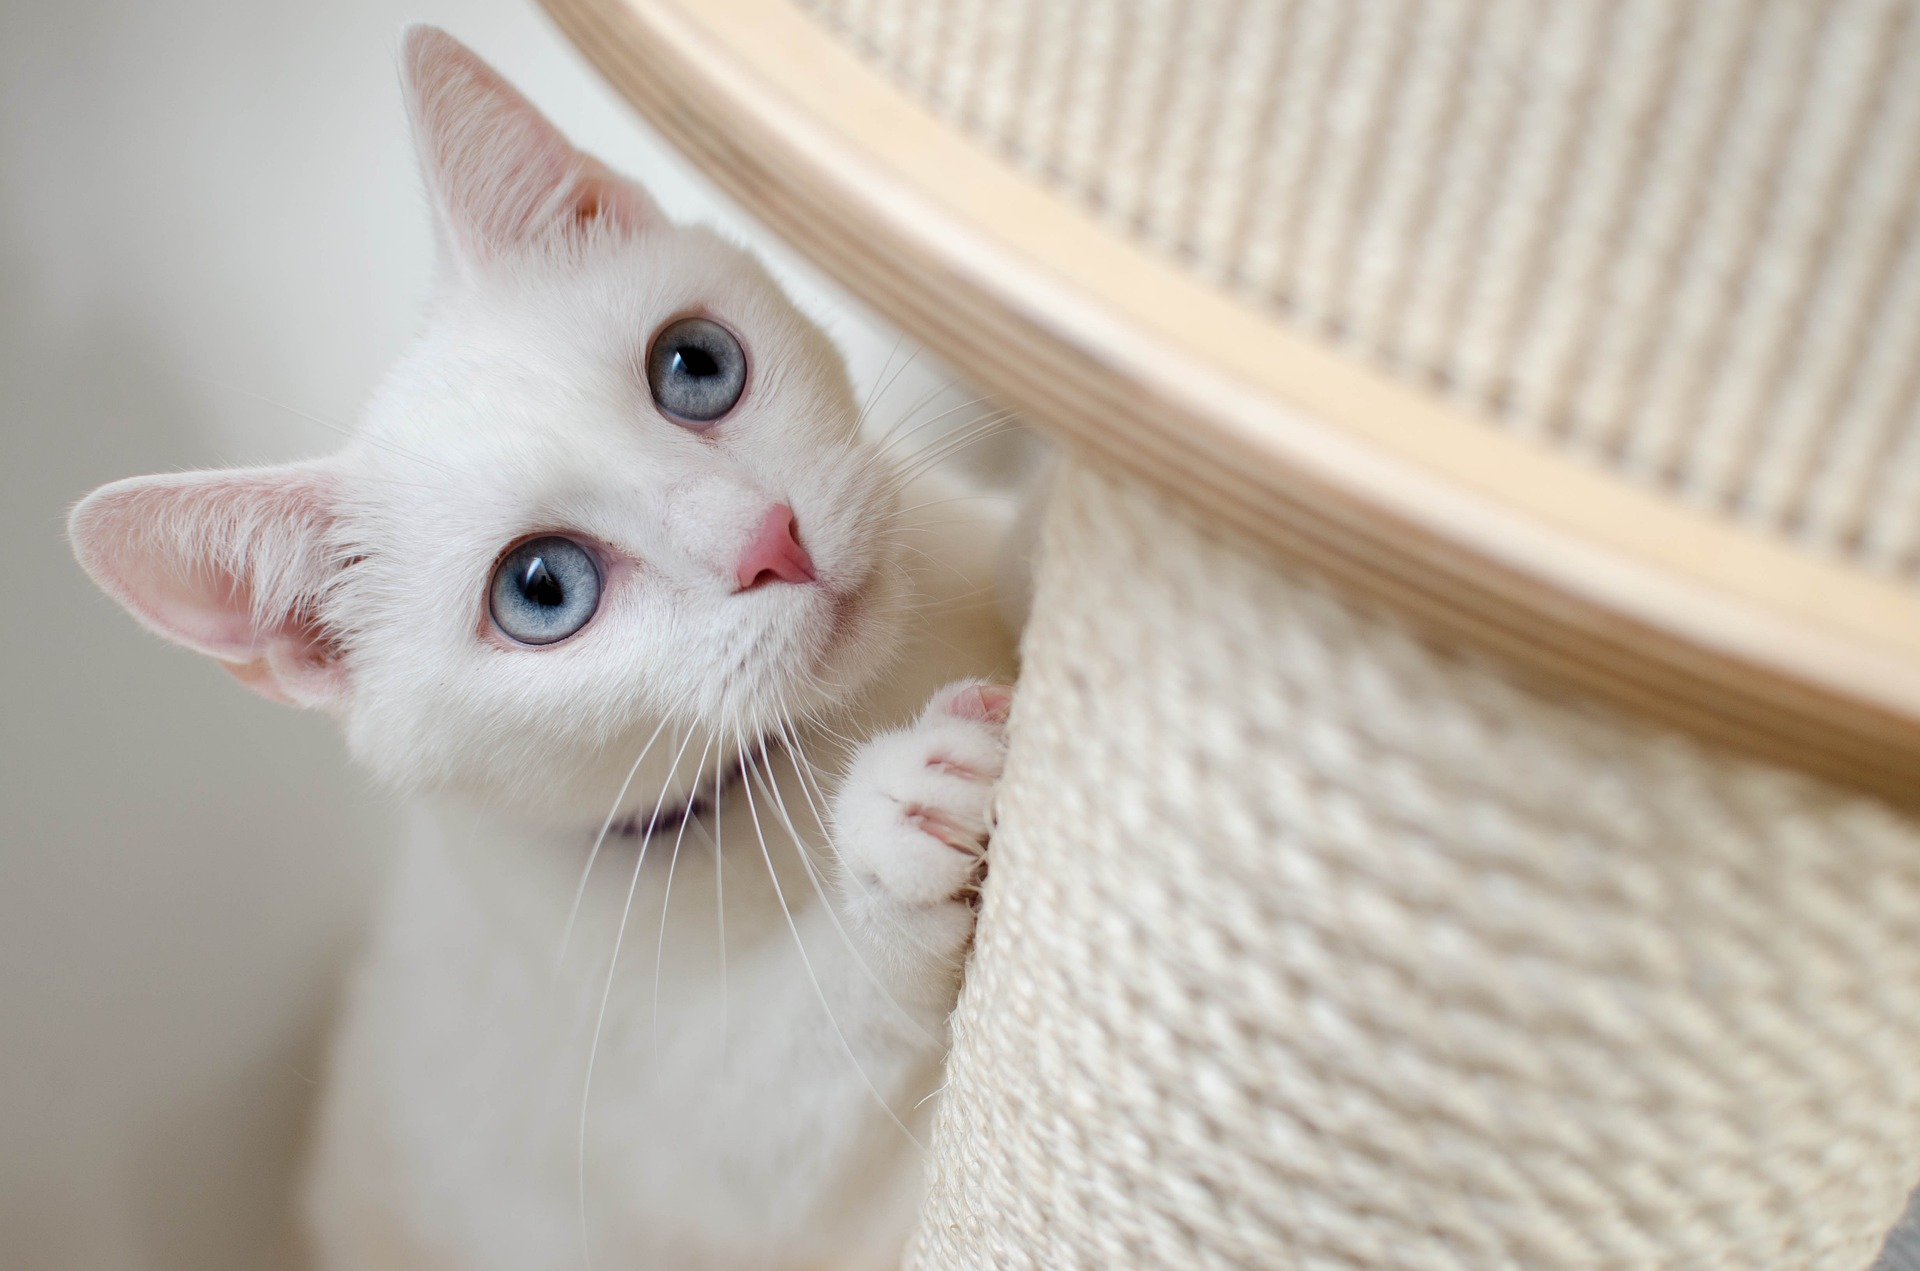  20 awesome cat names for your brand-new white kitten